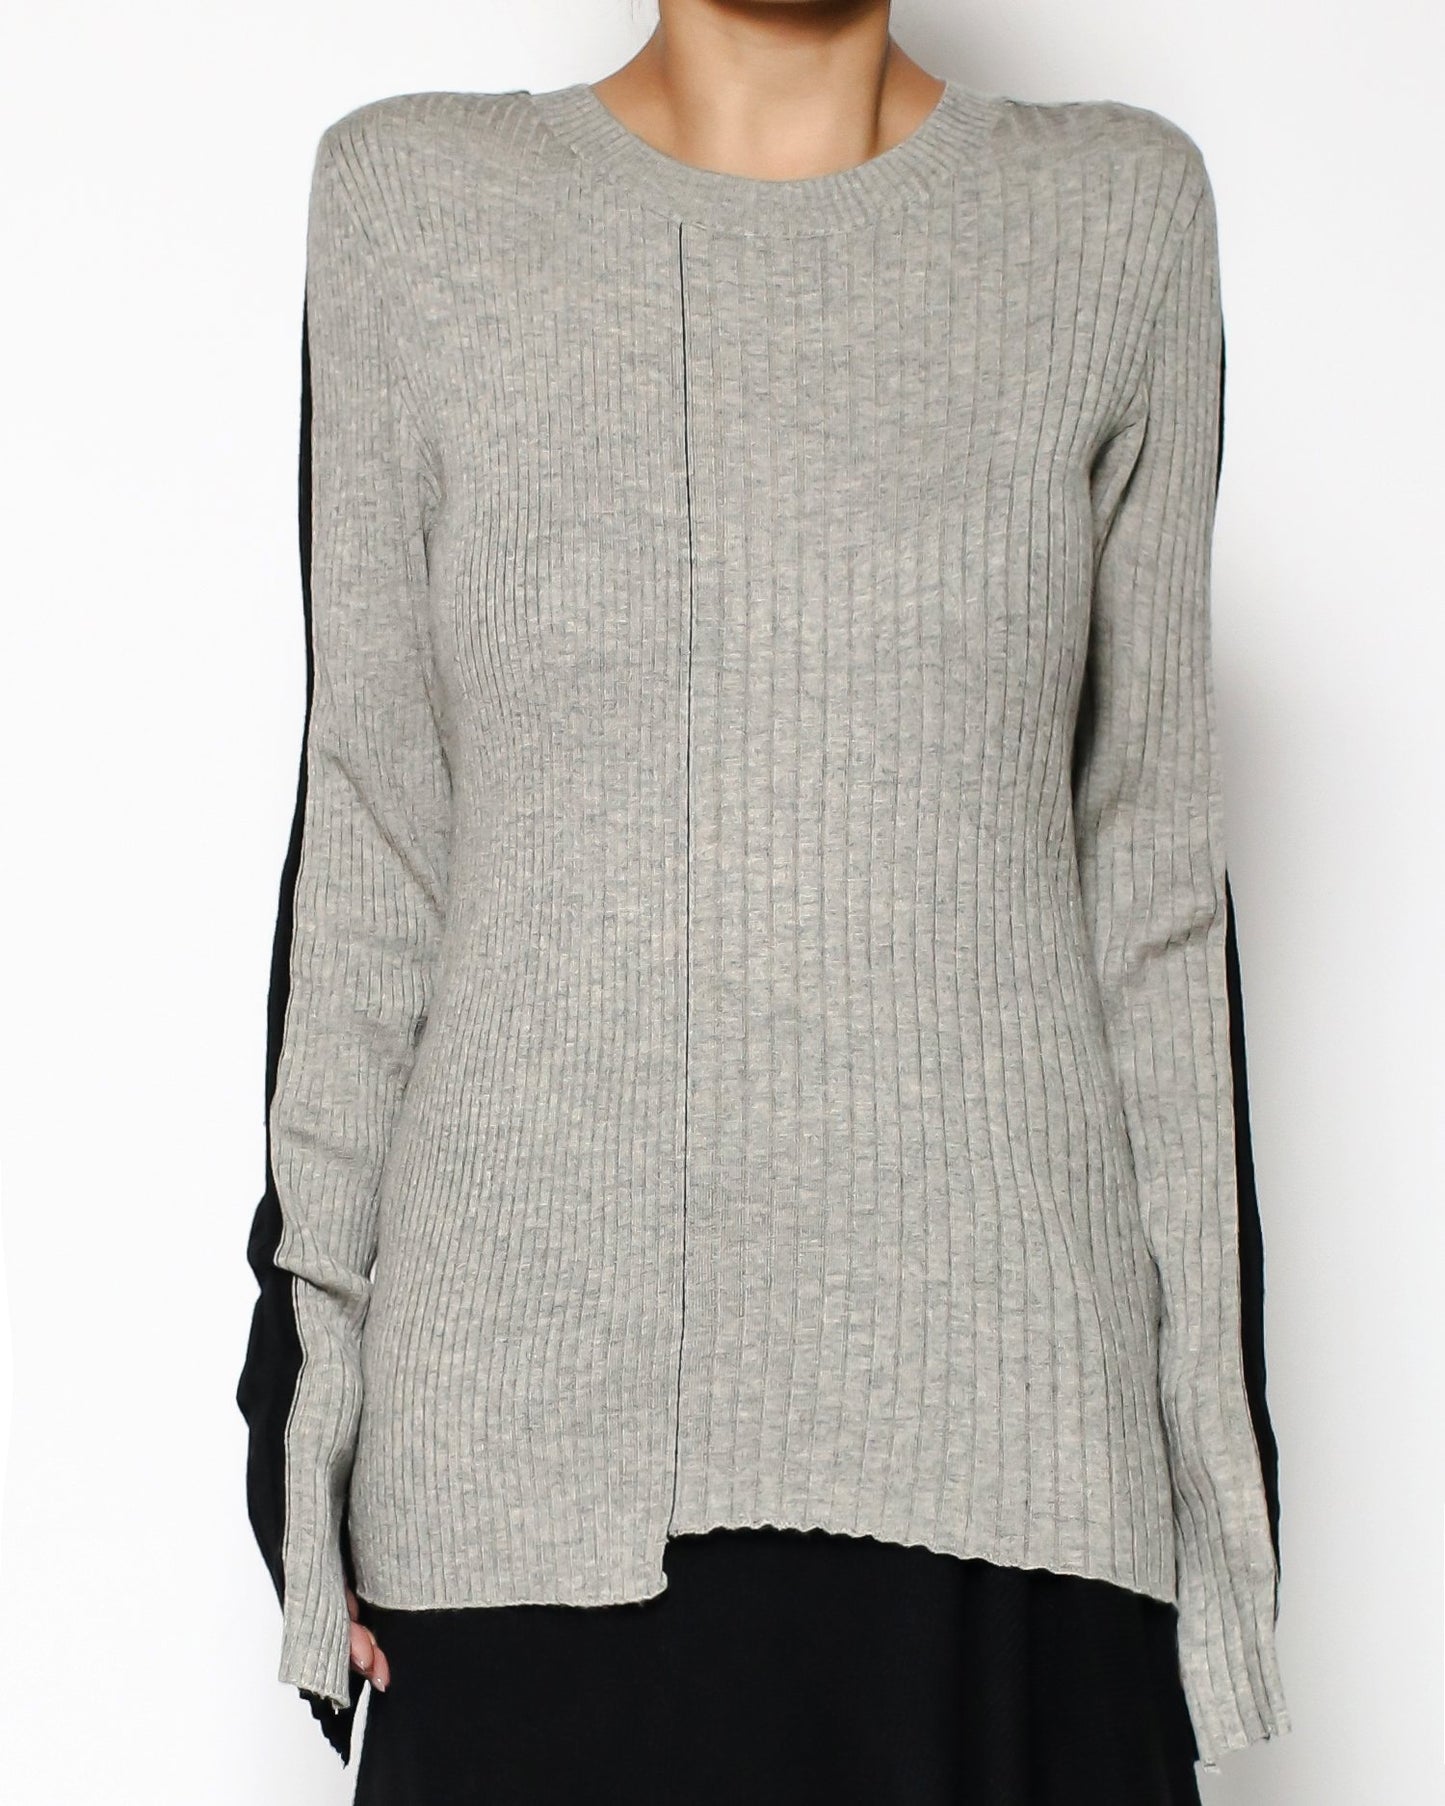 grey & black knitted top *pre-order*